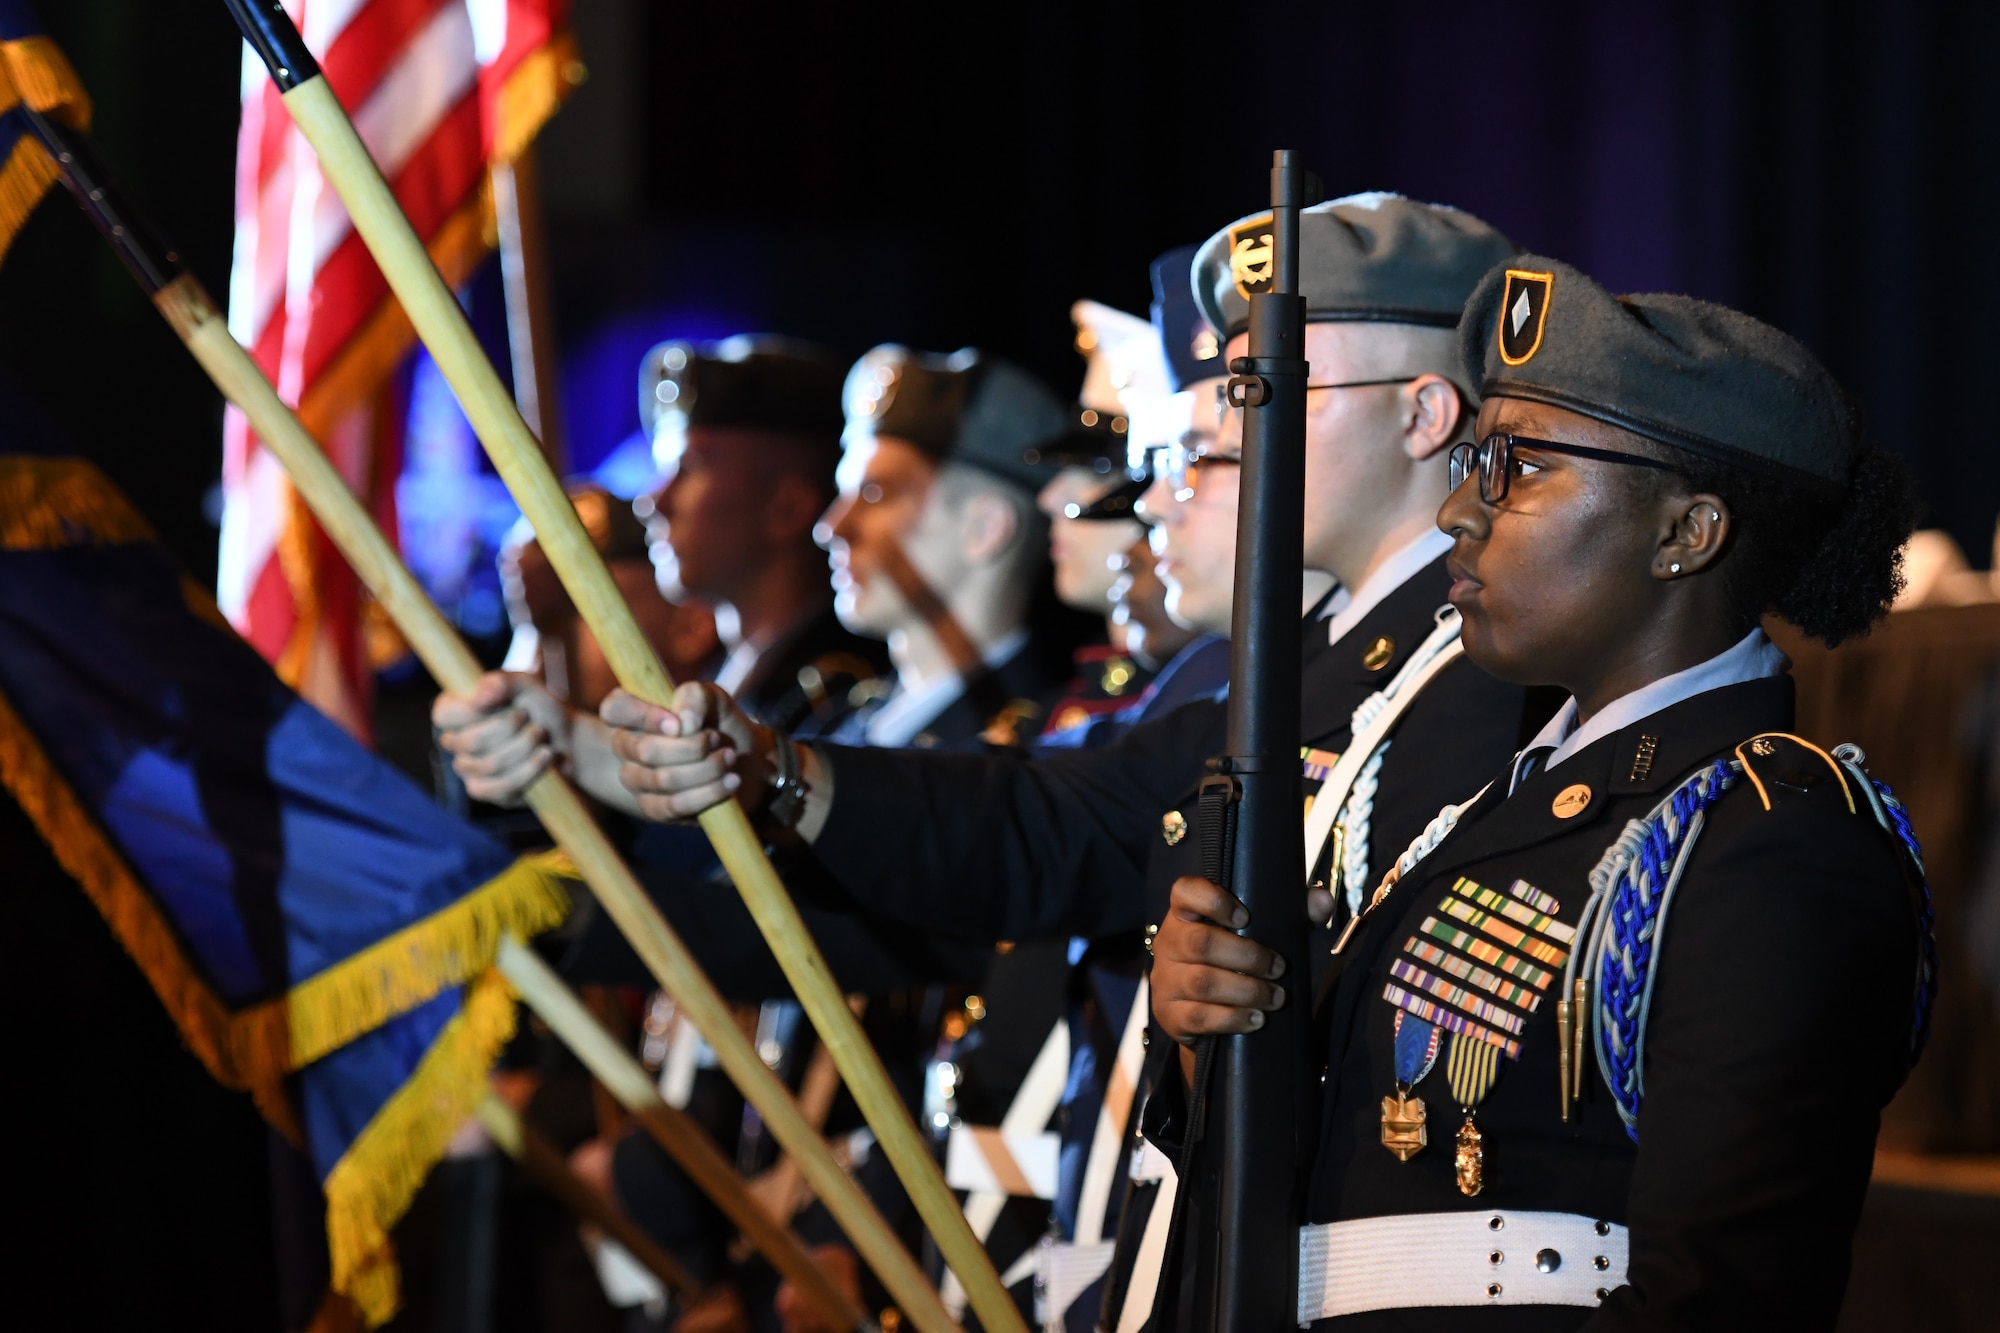 Joint Service-Junior ROTC cadets from local high schools present the colors during the 40th Annual Salute to the Military inside the Mississippi Coast Convention Center, in Biloxi, Mississippi, Oct. 16, 2018. The Salute to the Military event recognized the men and women who serve in the military along the Gulf Coast. (U.S. Air Force photo by Kemberly Groue)